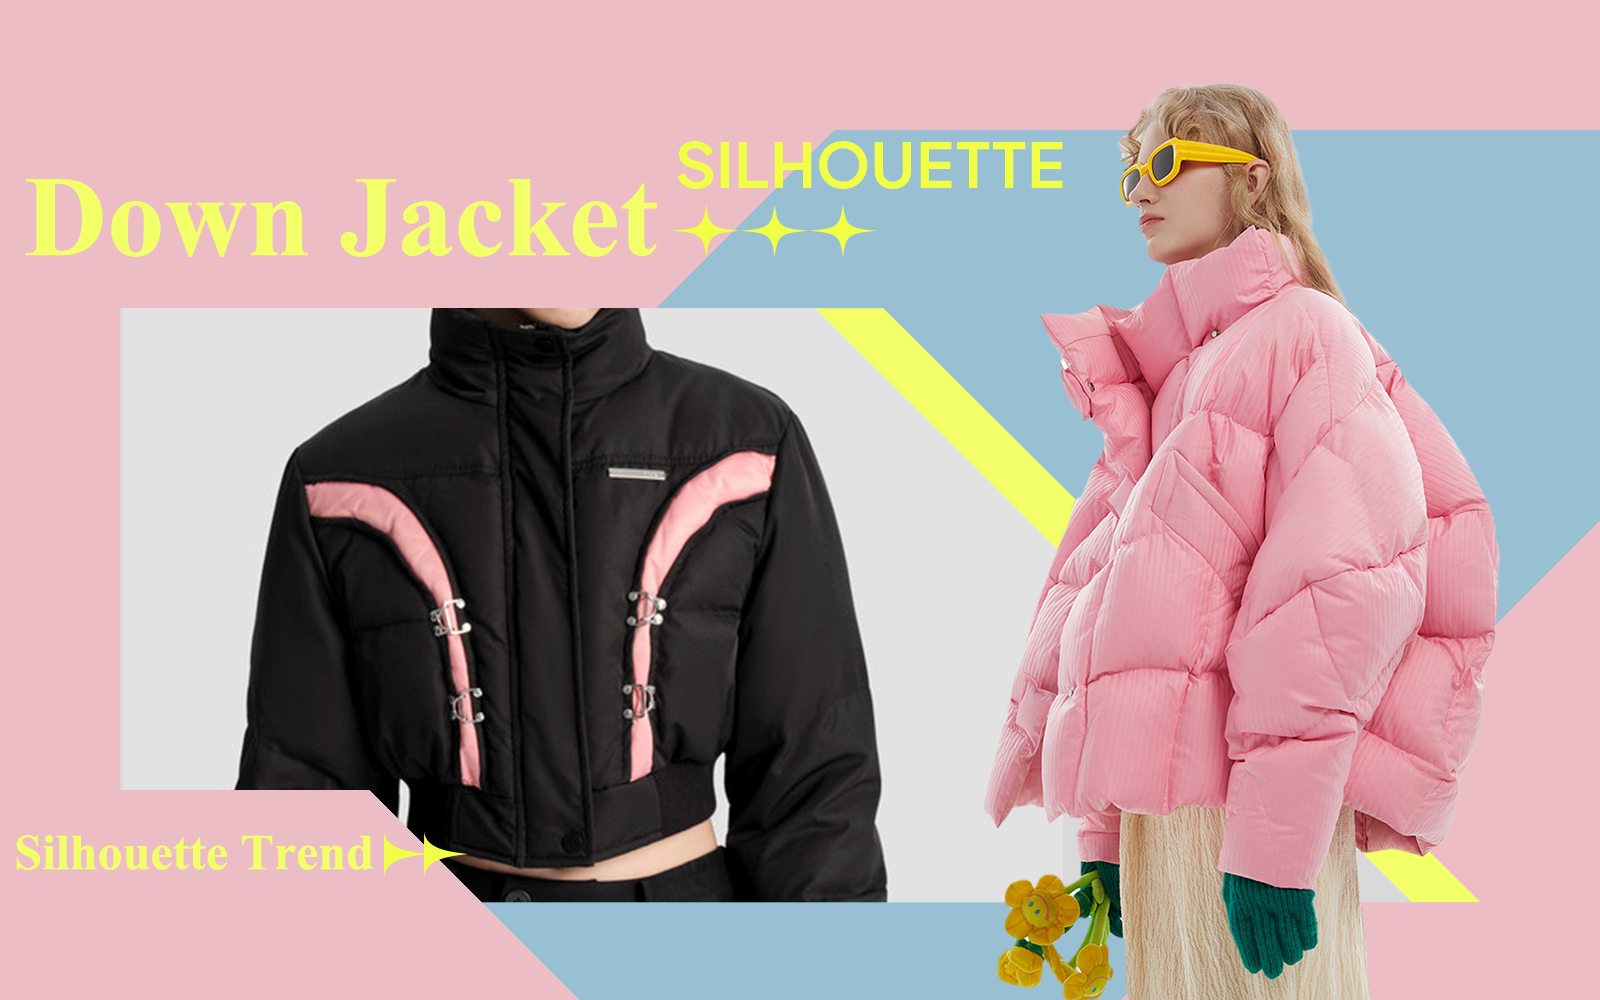 The Silhouette Trend for Women's Down Jacket